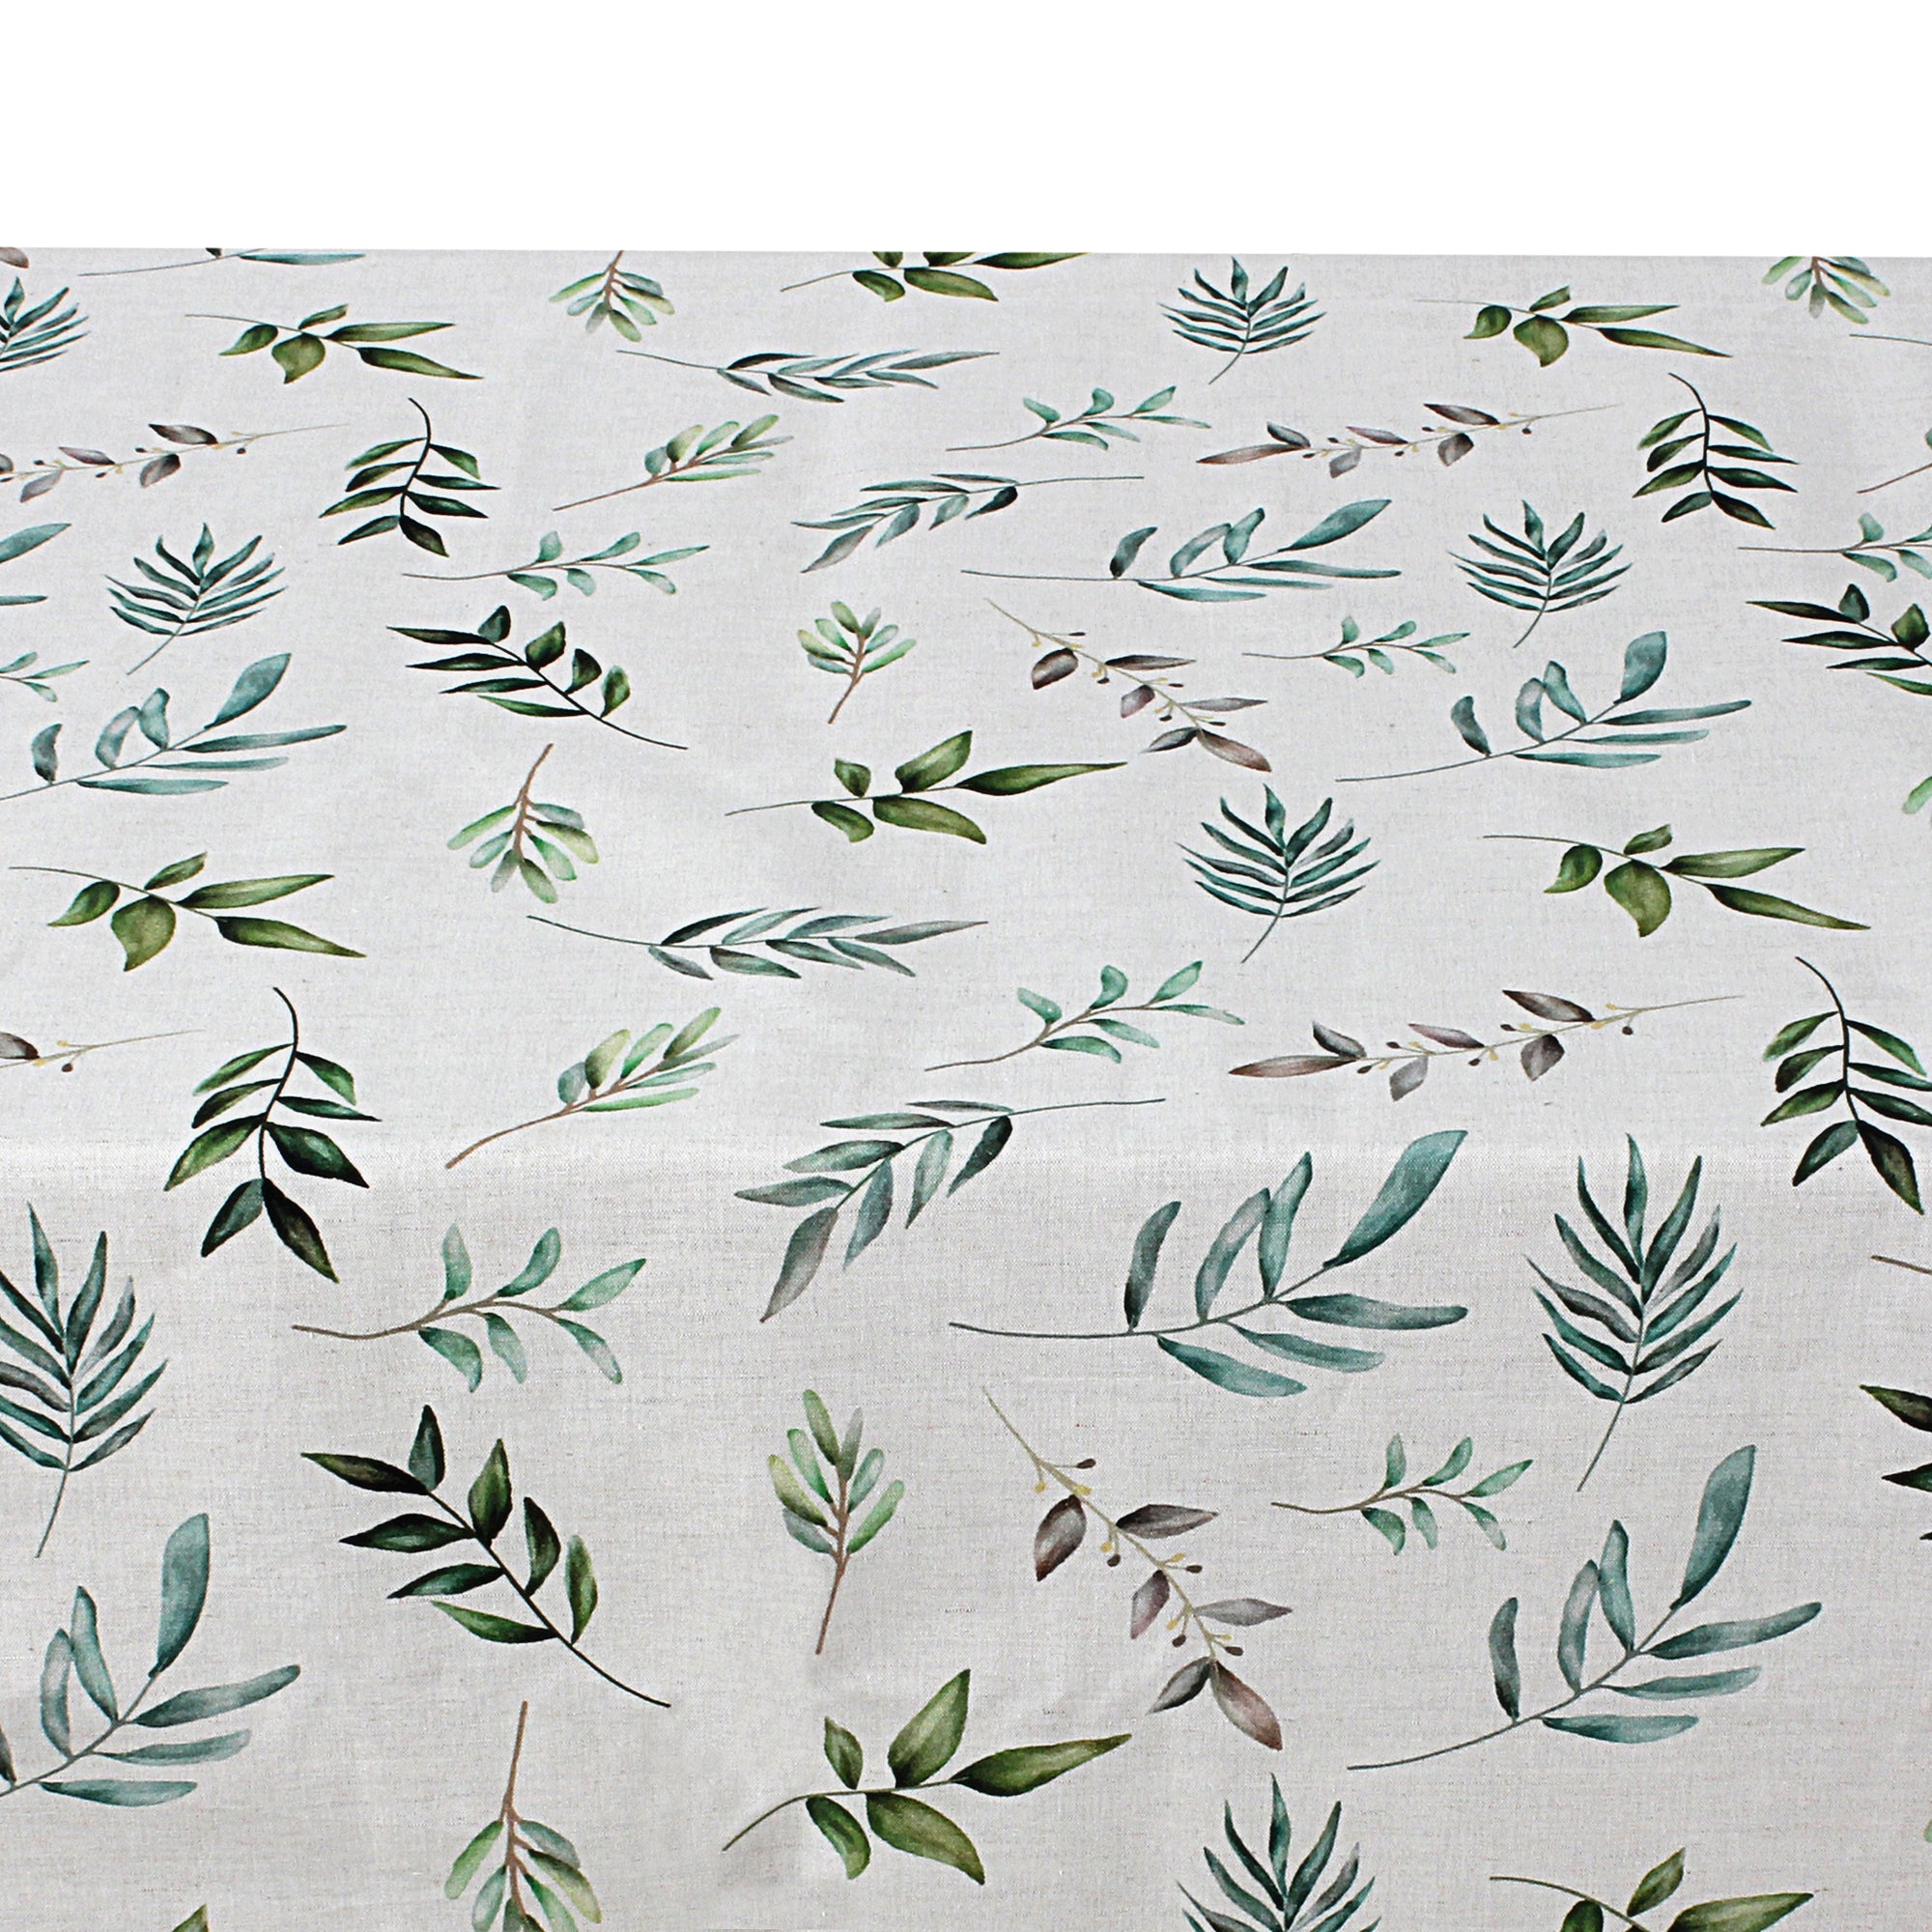 Forest Leaves Linen Tablecloth